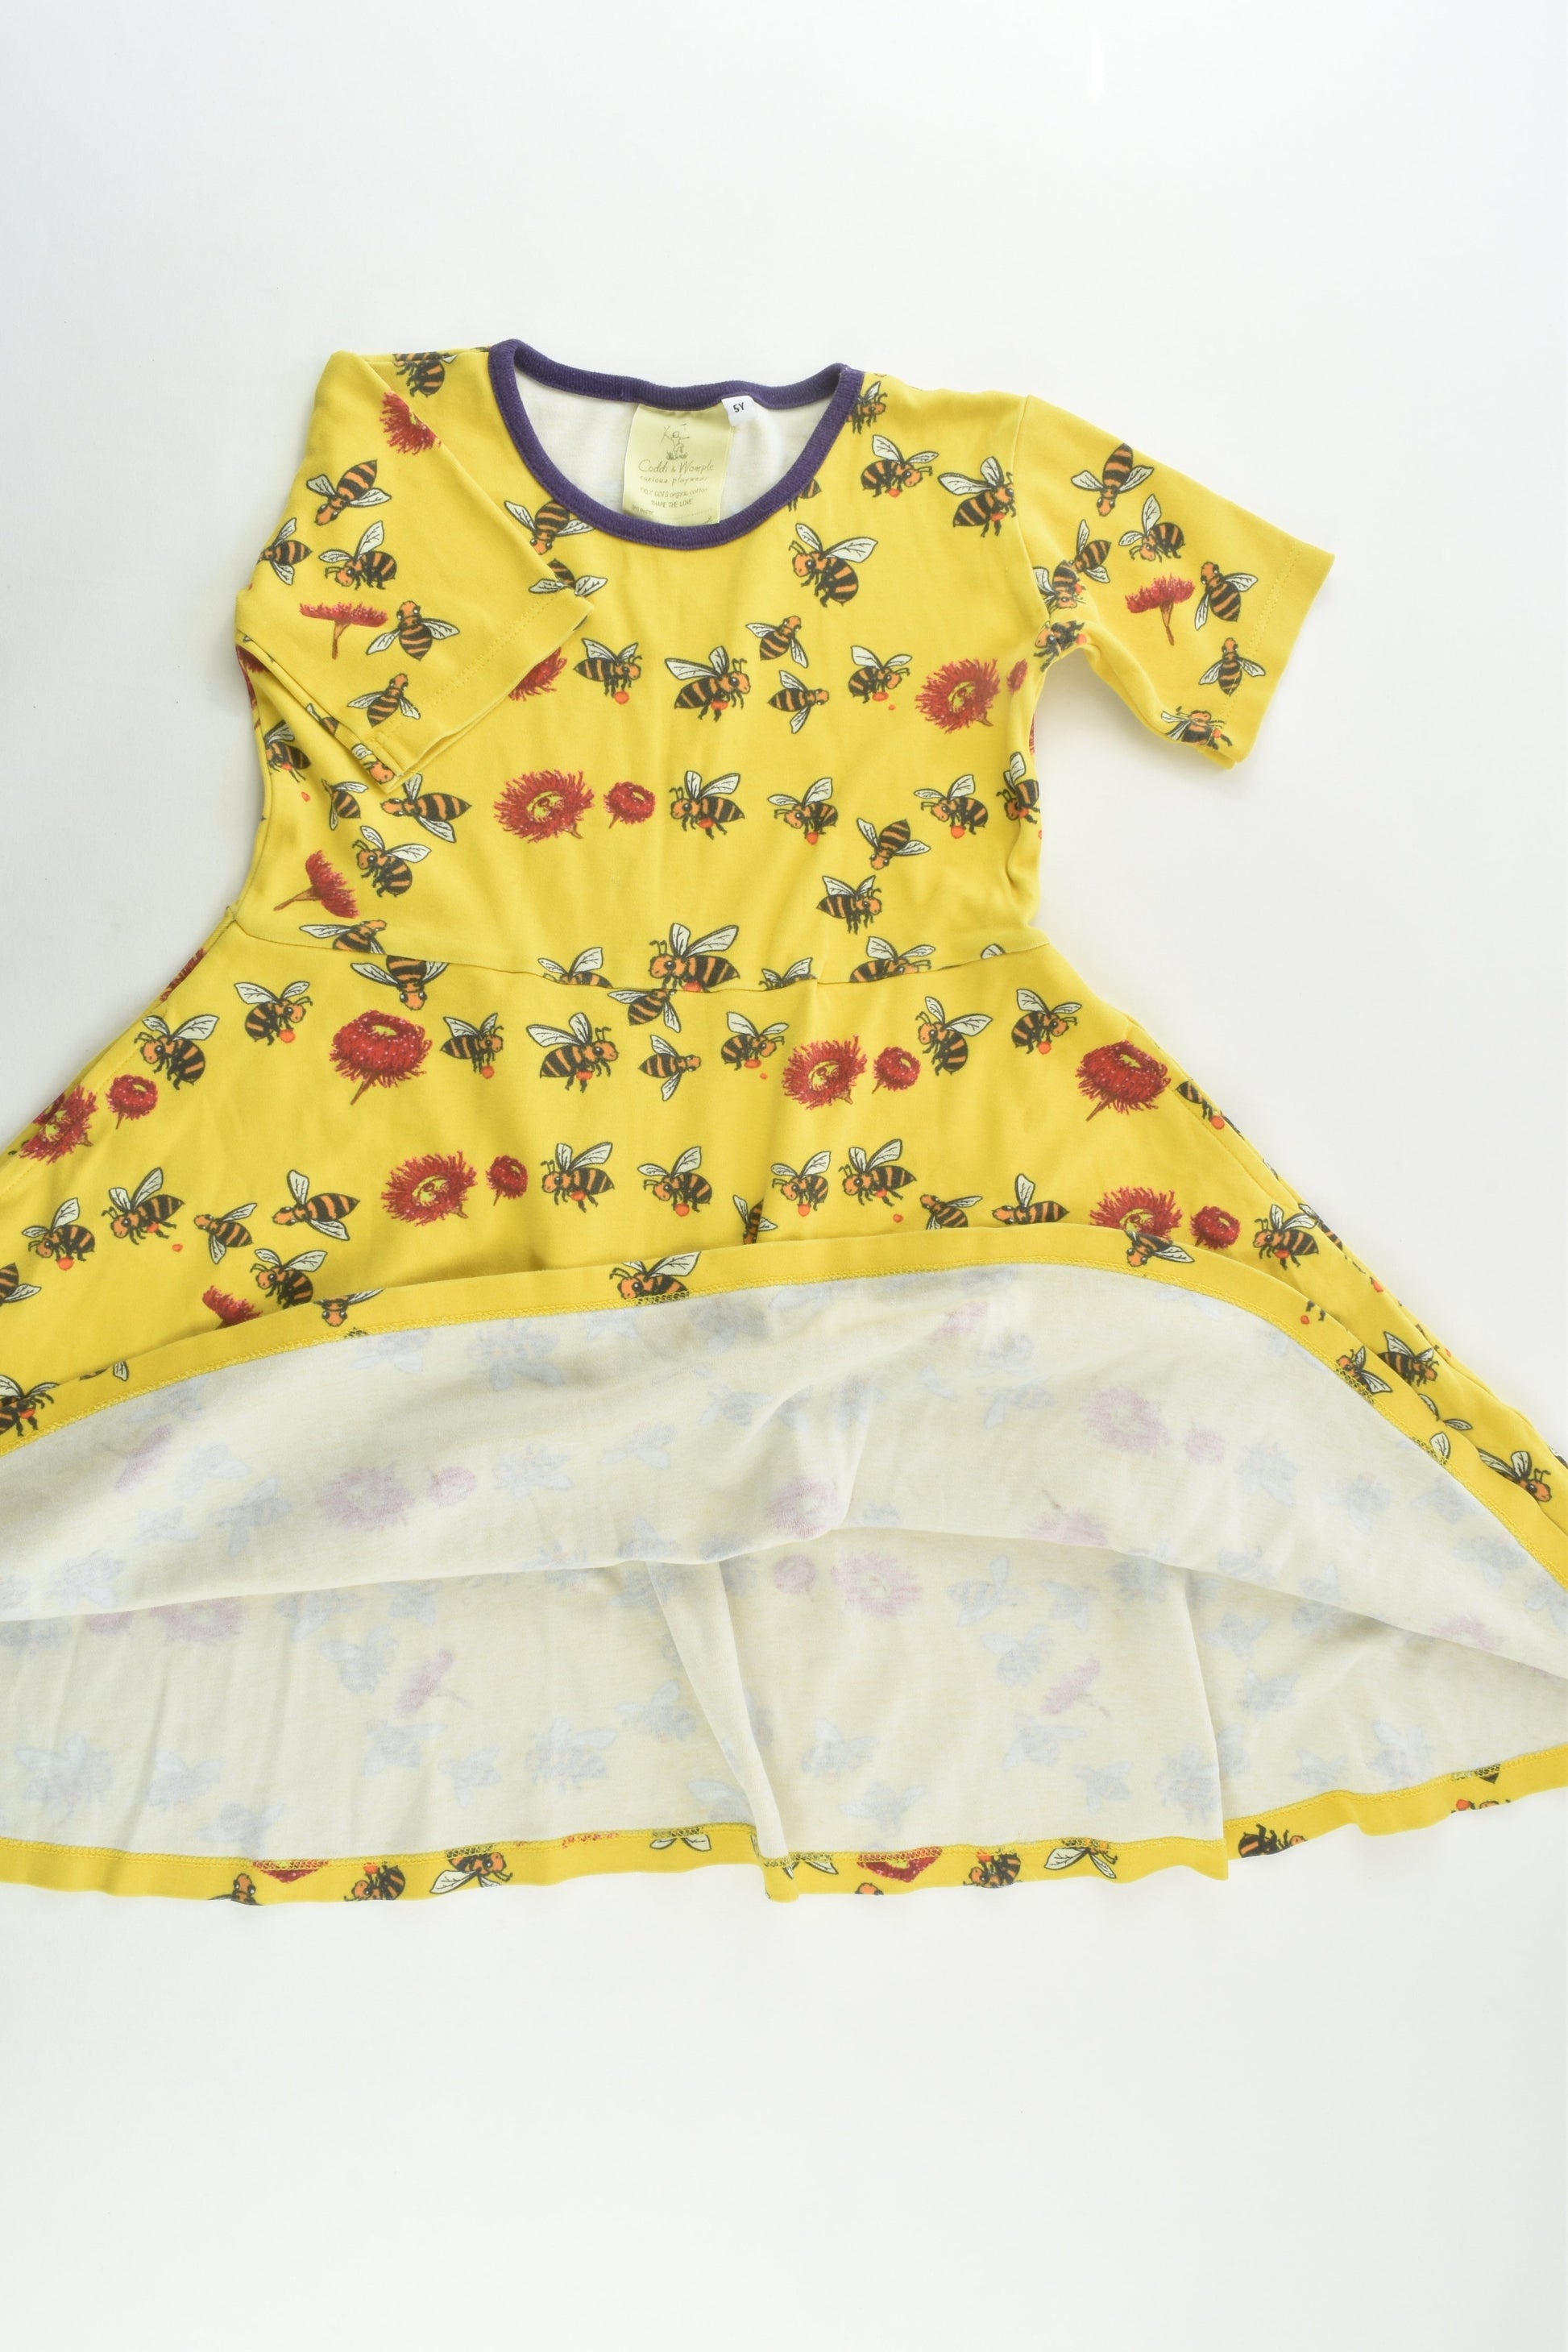 Coddie & Womple Size 5 Bumble Bees Organic Dress